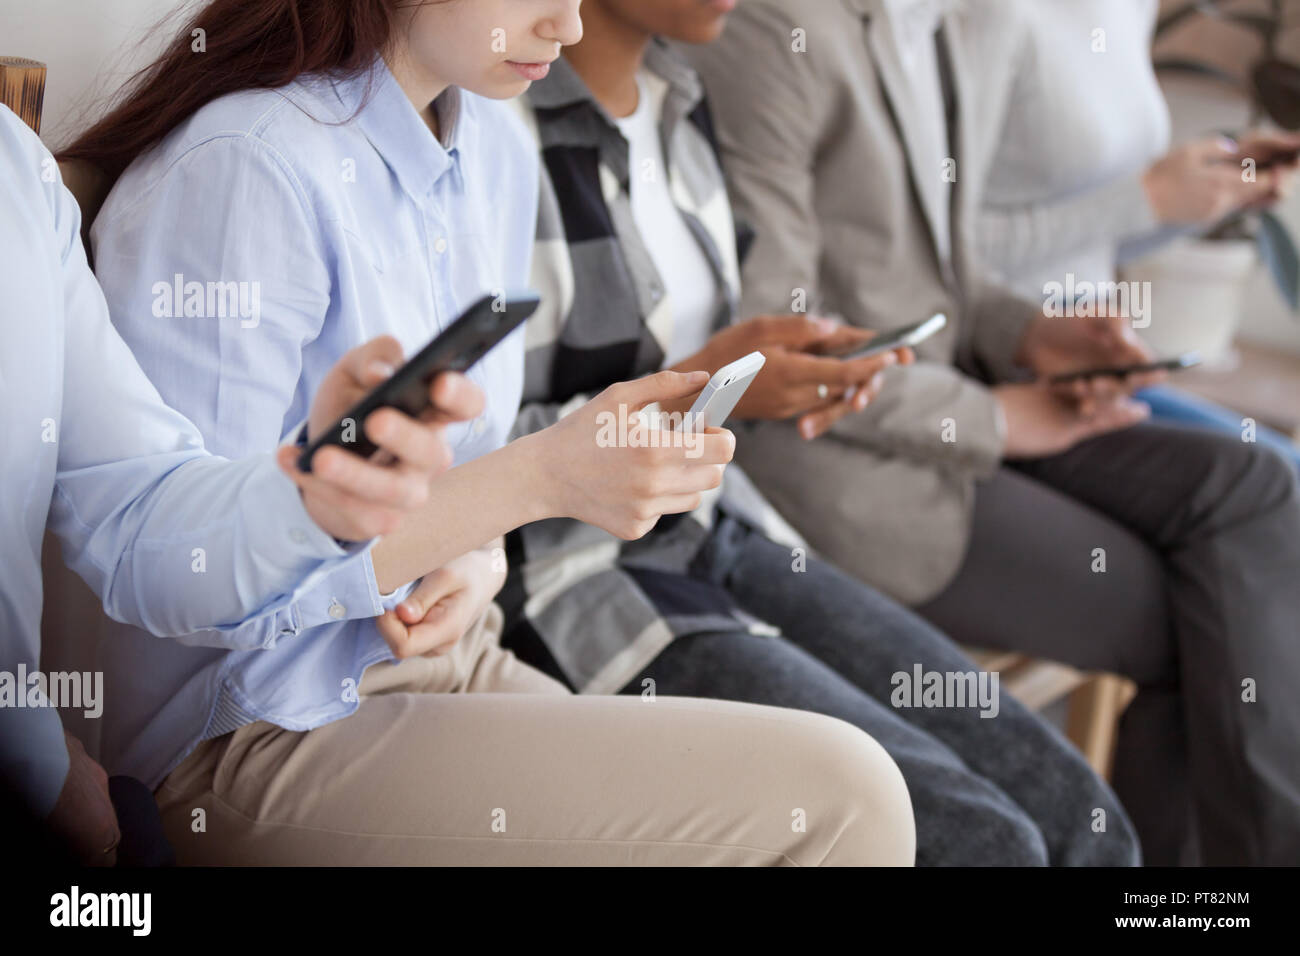 Candidates sitting in chair in queue wait job interview Stock Photo